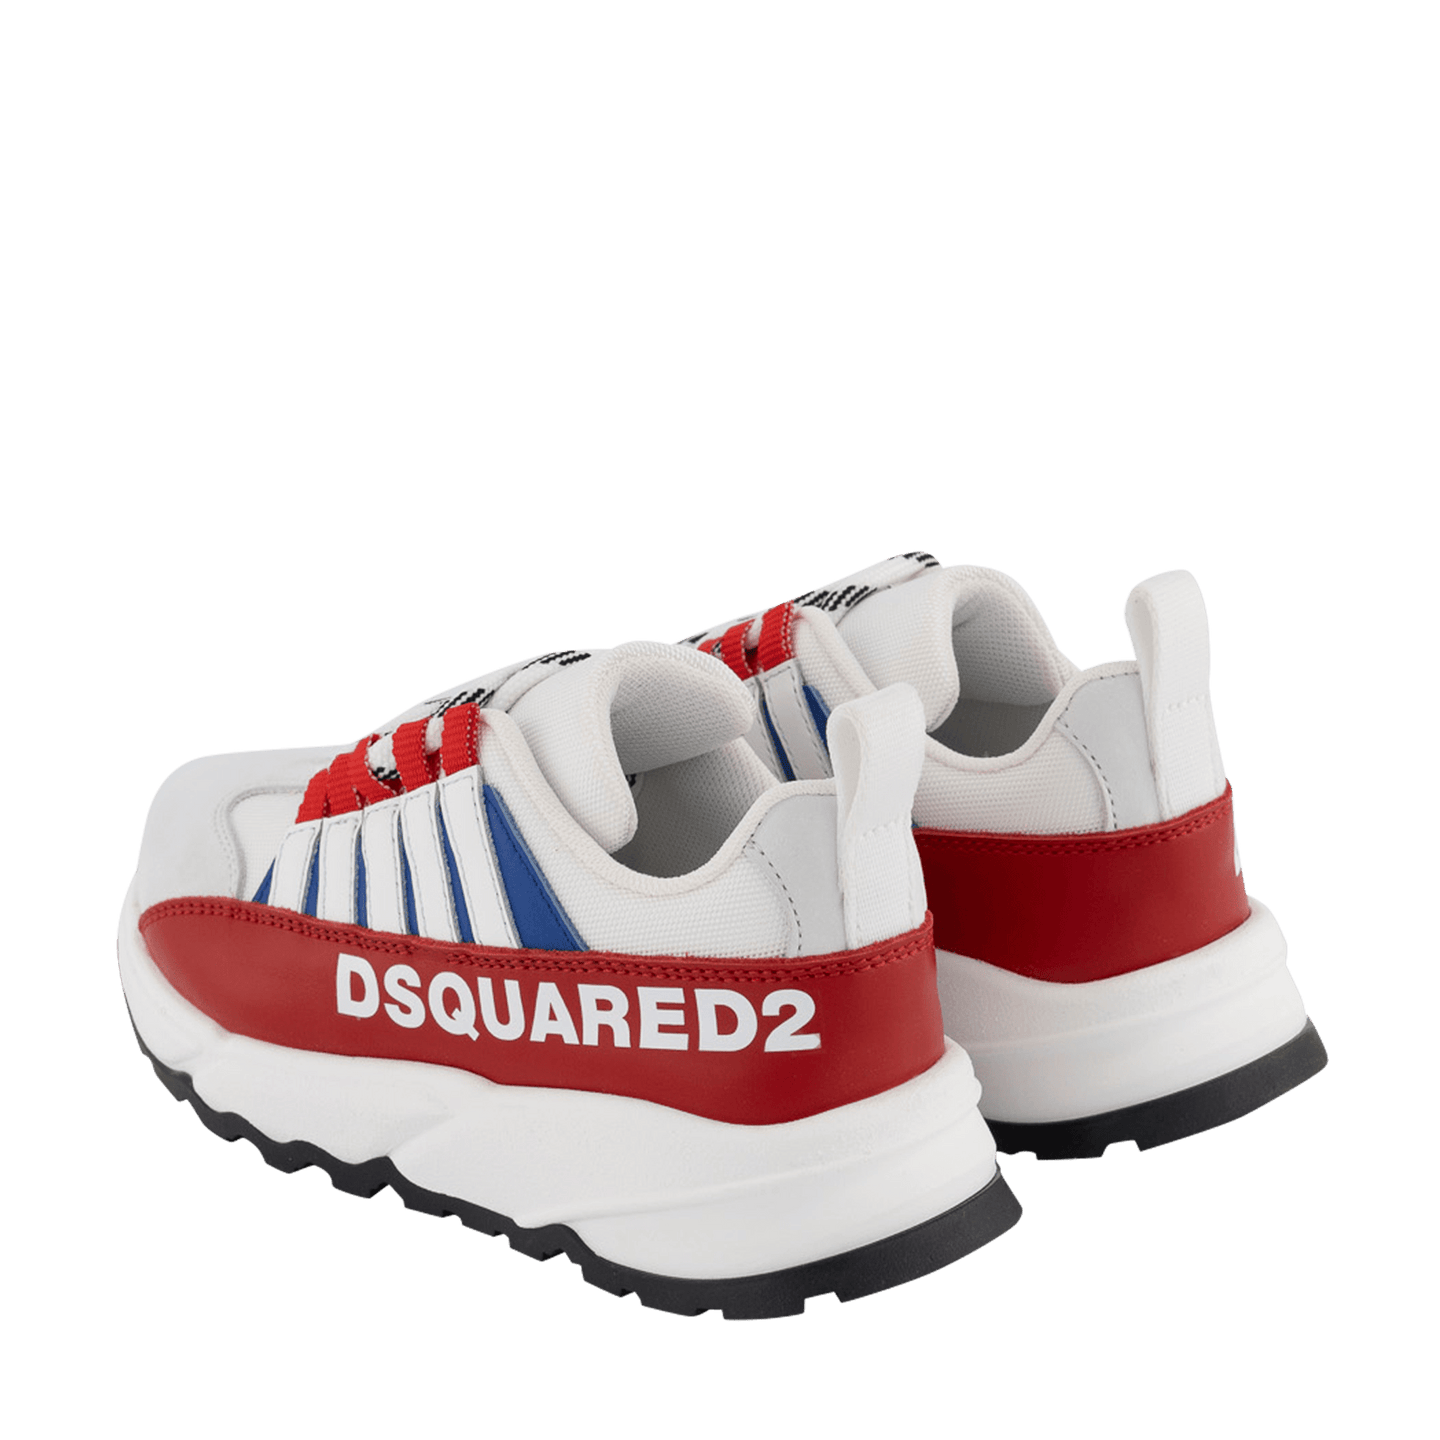 Dsquared2 Kinder Unisex Sneakers Wit 27